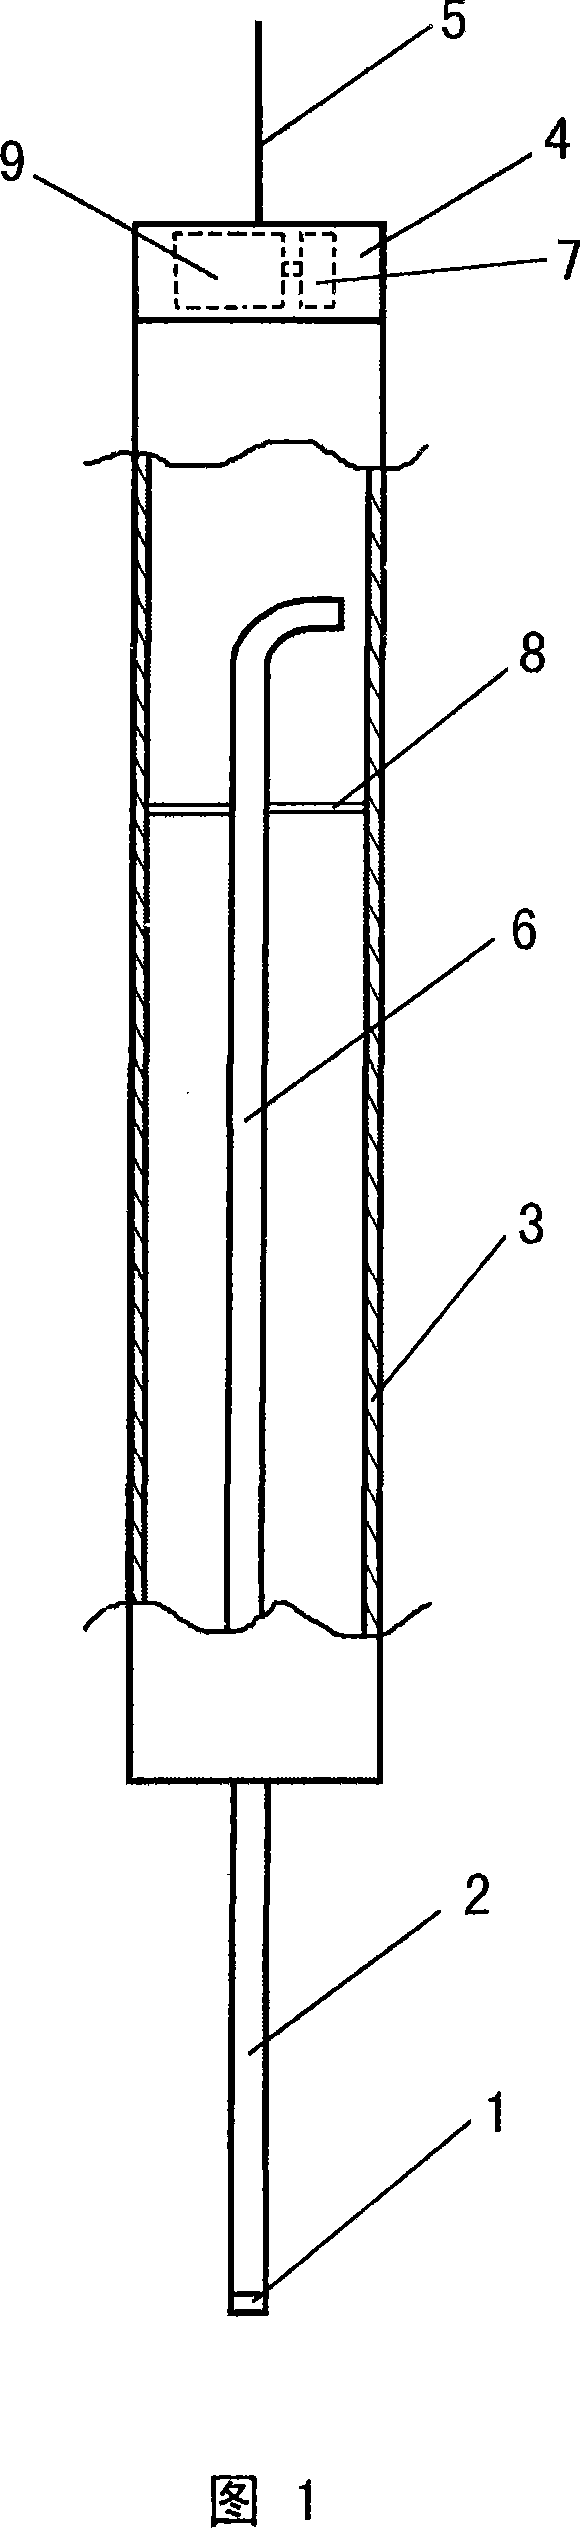 Blast bottom expanding and pile-forming method for pipe sinking prefabricated steel concrete pedestal pile